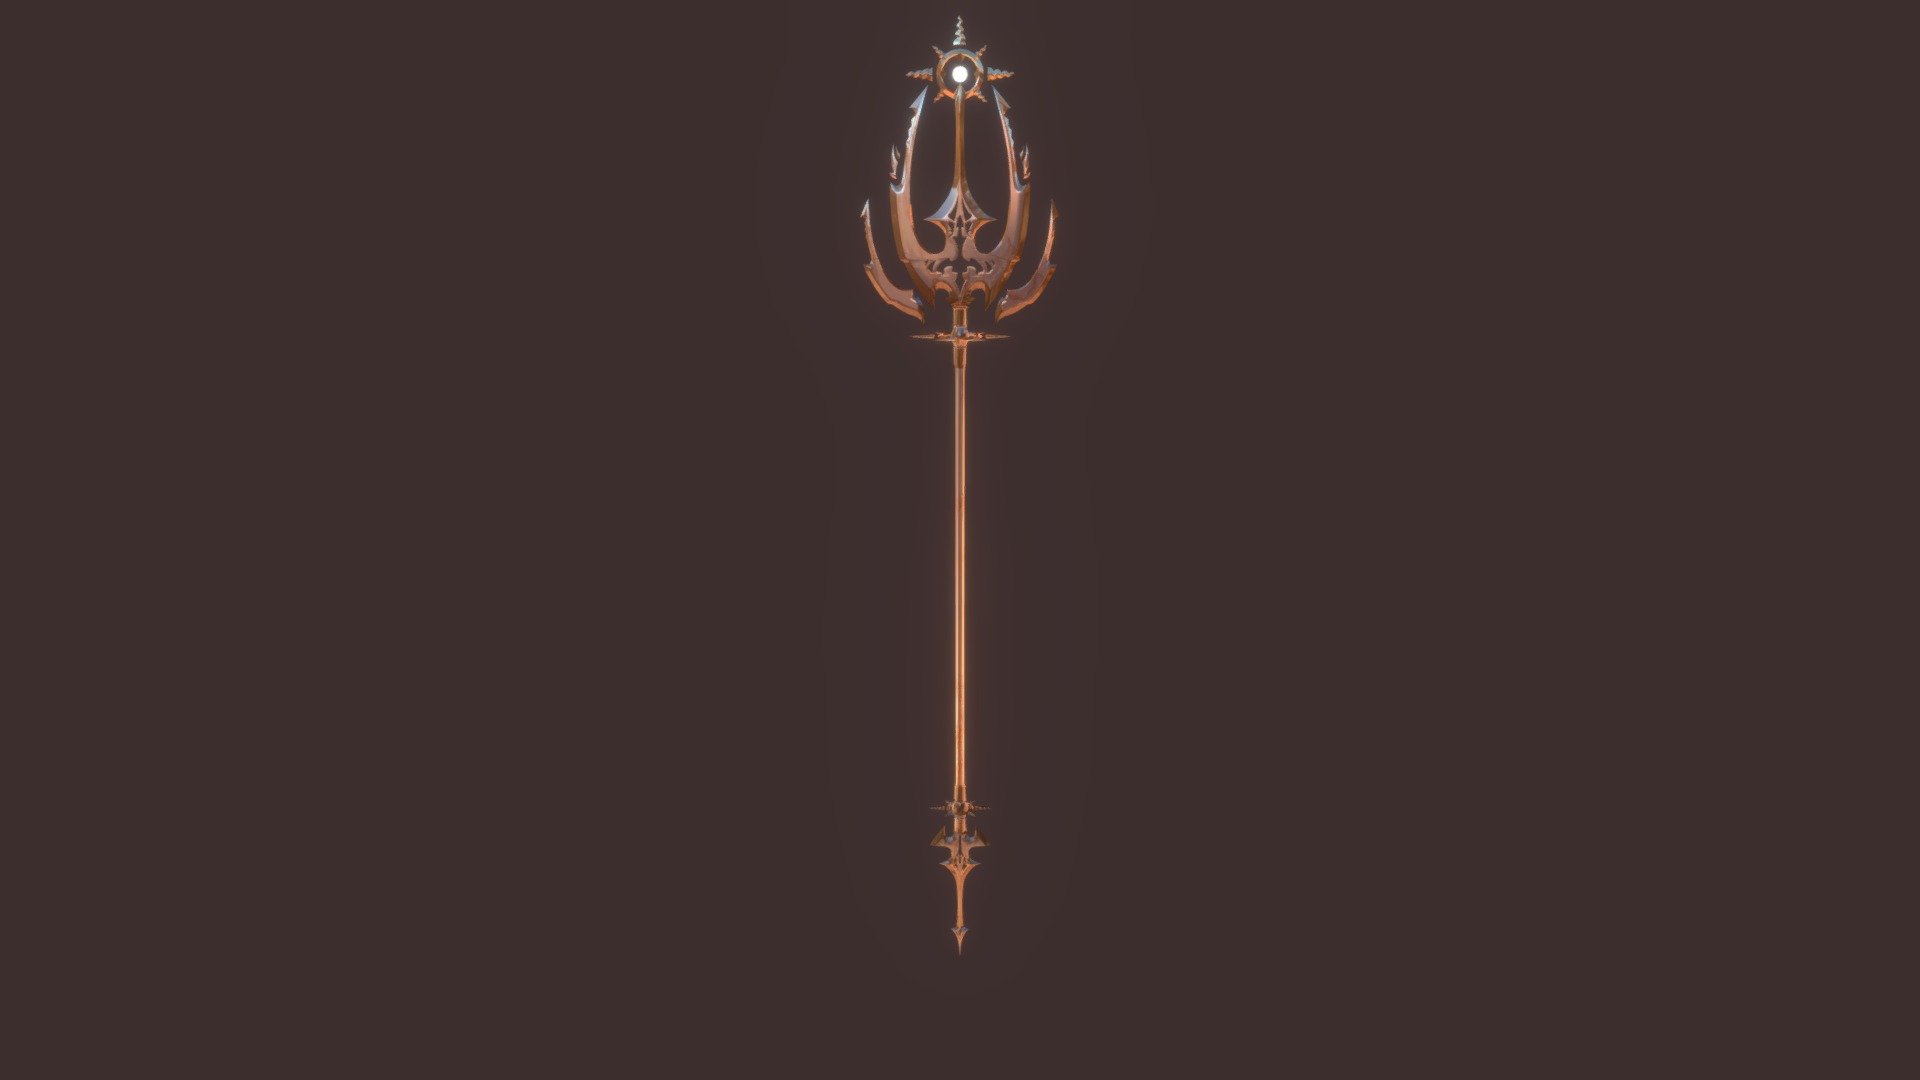 An antient ceremonial royal trident, A divine weapon seemingly having been handcrafted extremely carefully to imbody the appearance and skill of a sun god faithfully worshiped by a fallen native kingdom 3000 years ago. despite its seniority it stayed relatively well preserved in the catacombs of the withered and abandoned kingdom, still emitting a faint glow from the orb seemingly being powered by sunlight conceiving tiny sparks when fully charged, which seems to give the celestial weapon the ability to have the orb go up in flames and disintegrating weak nearby opponents and severely harming and immobilizing stronger of farther away opponents by giving them high degree burns. Even though it was kept far down the people of the kingdom still managed to get sunlight down in the catacombs which was essential since the people of the kingdom believed the weapon to have a direct correlation to the sun, if something happened to the orb or the glow were to dim, so would the sun and so would their god 3d model